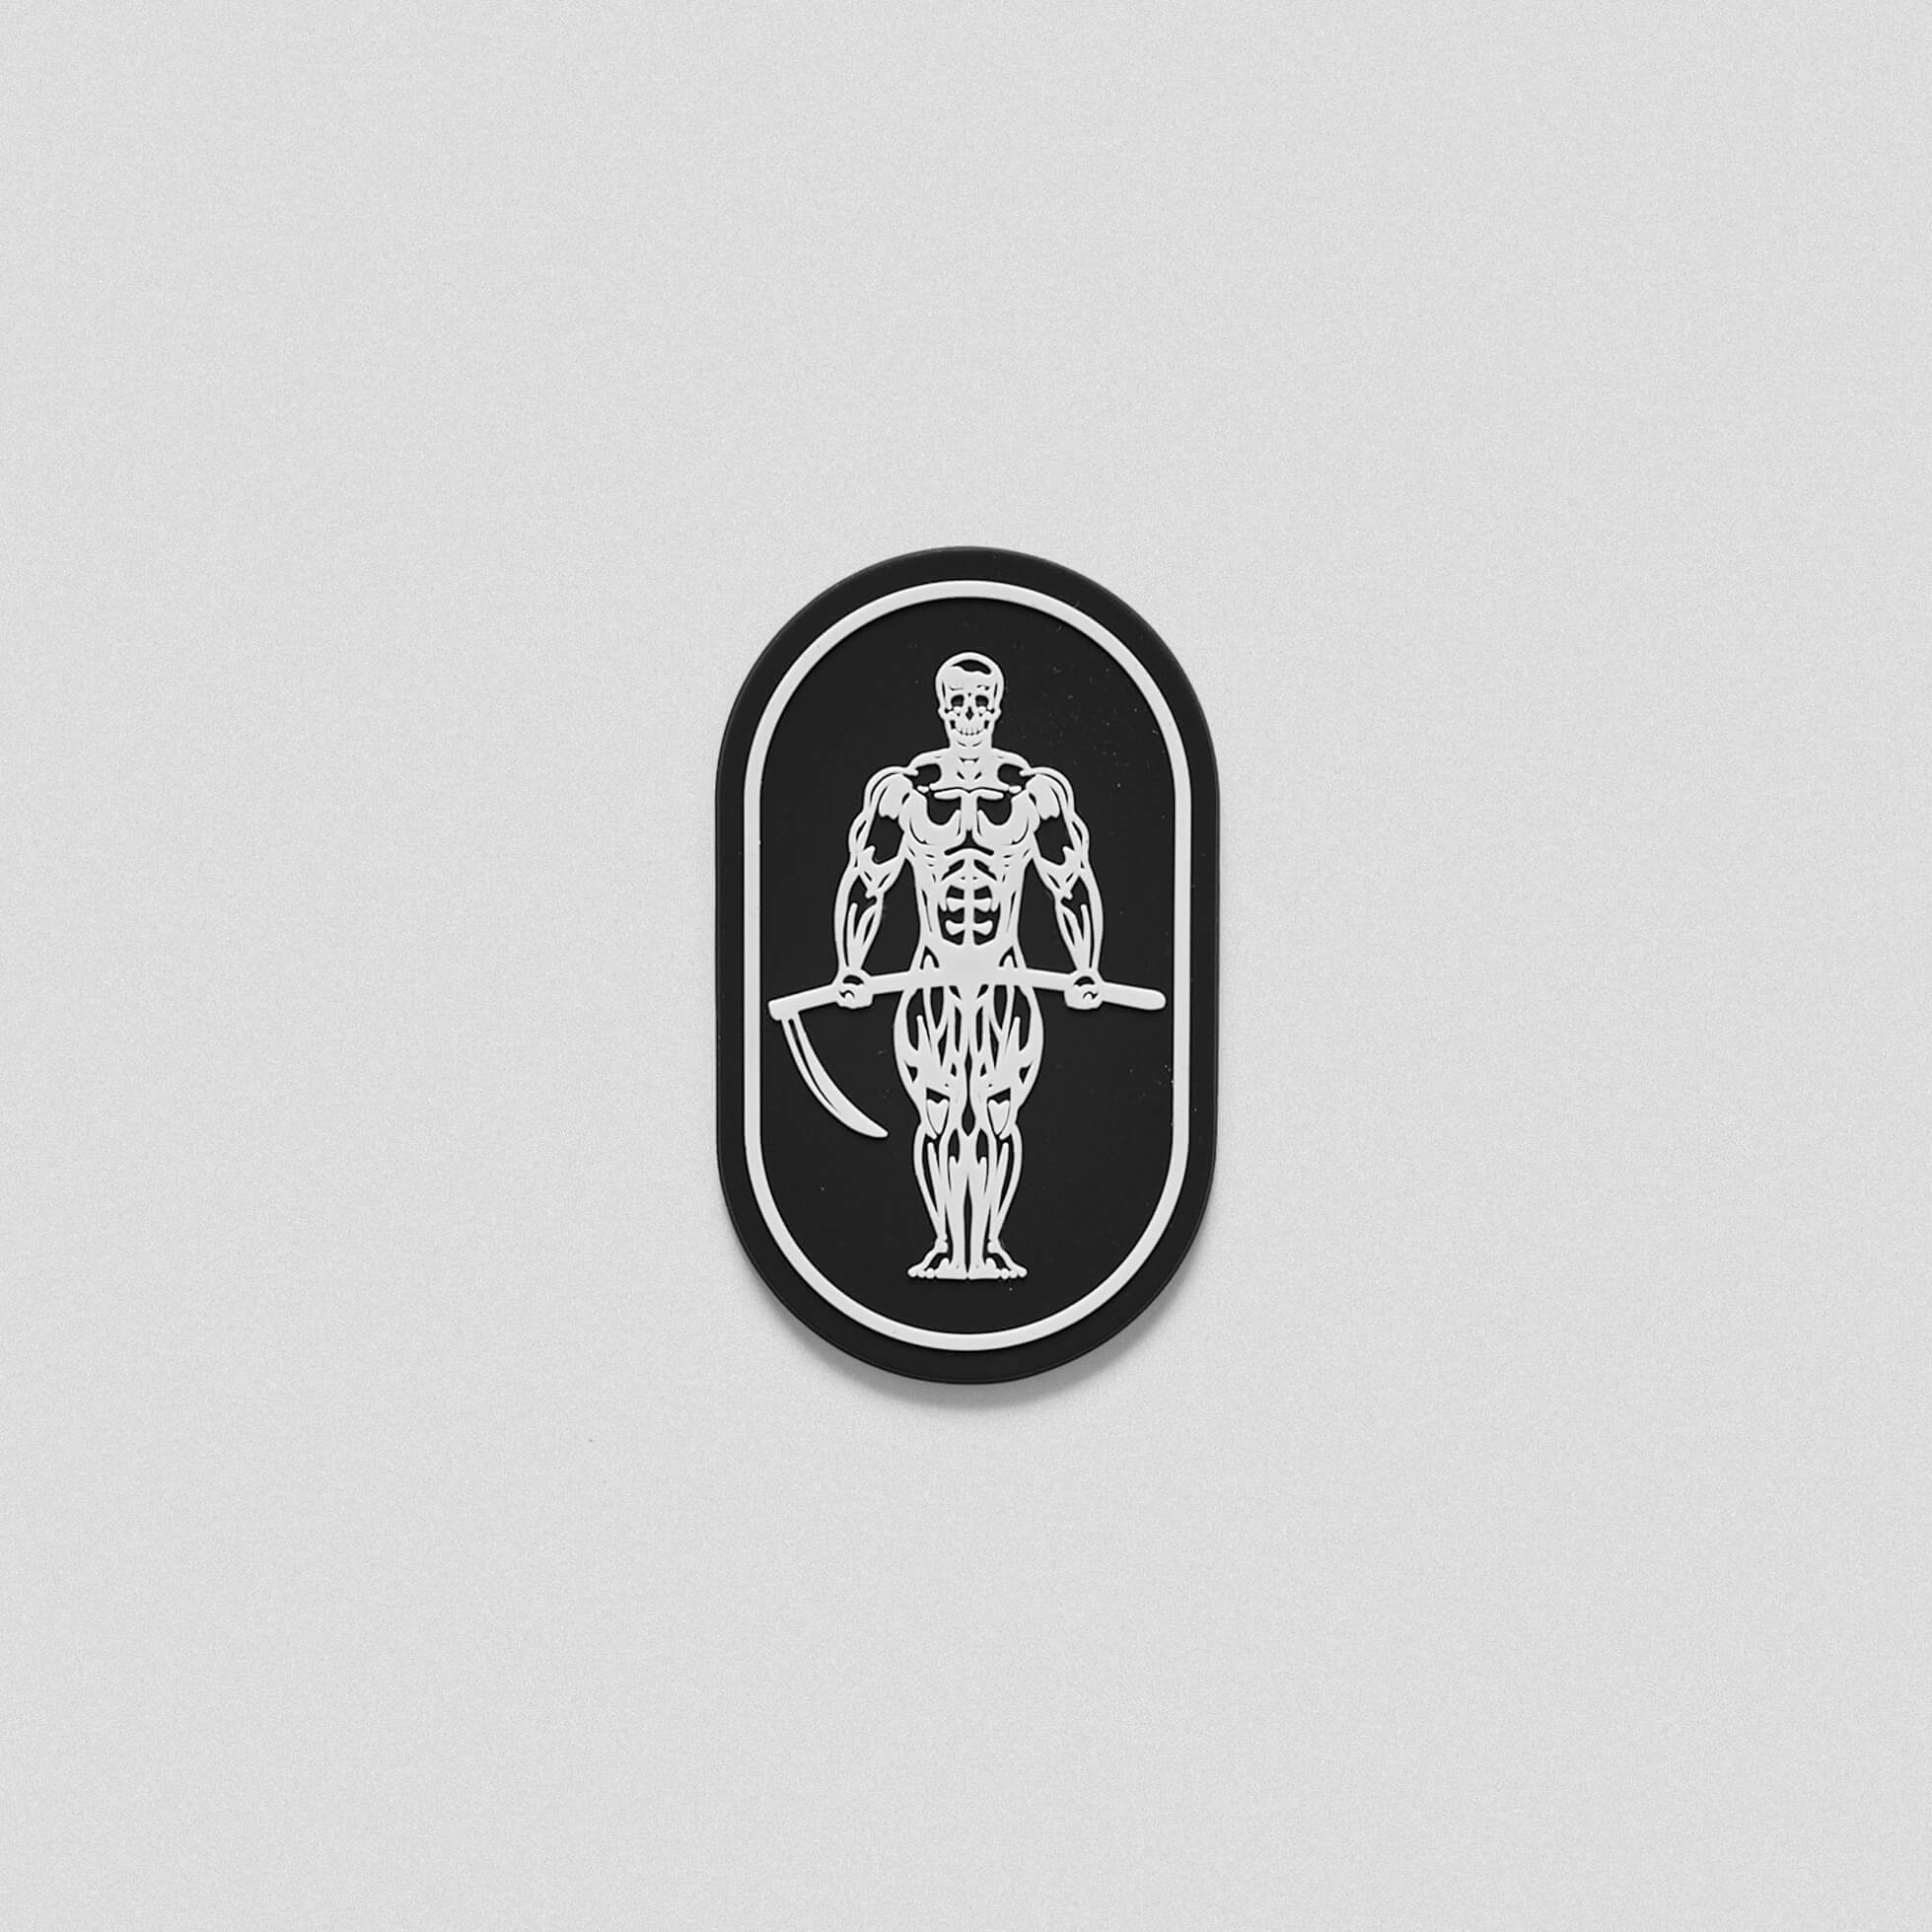 A black and white patch with a skeleton holding a scythe.